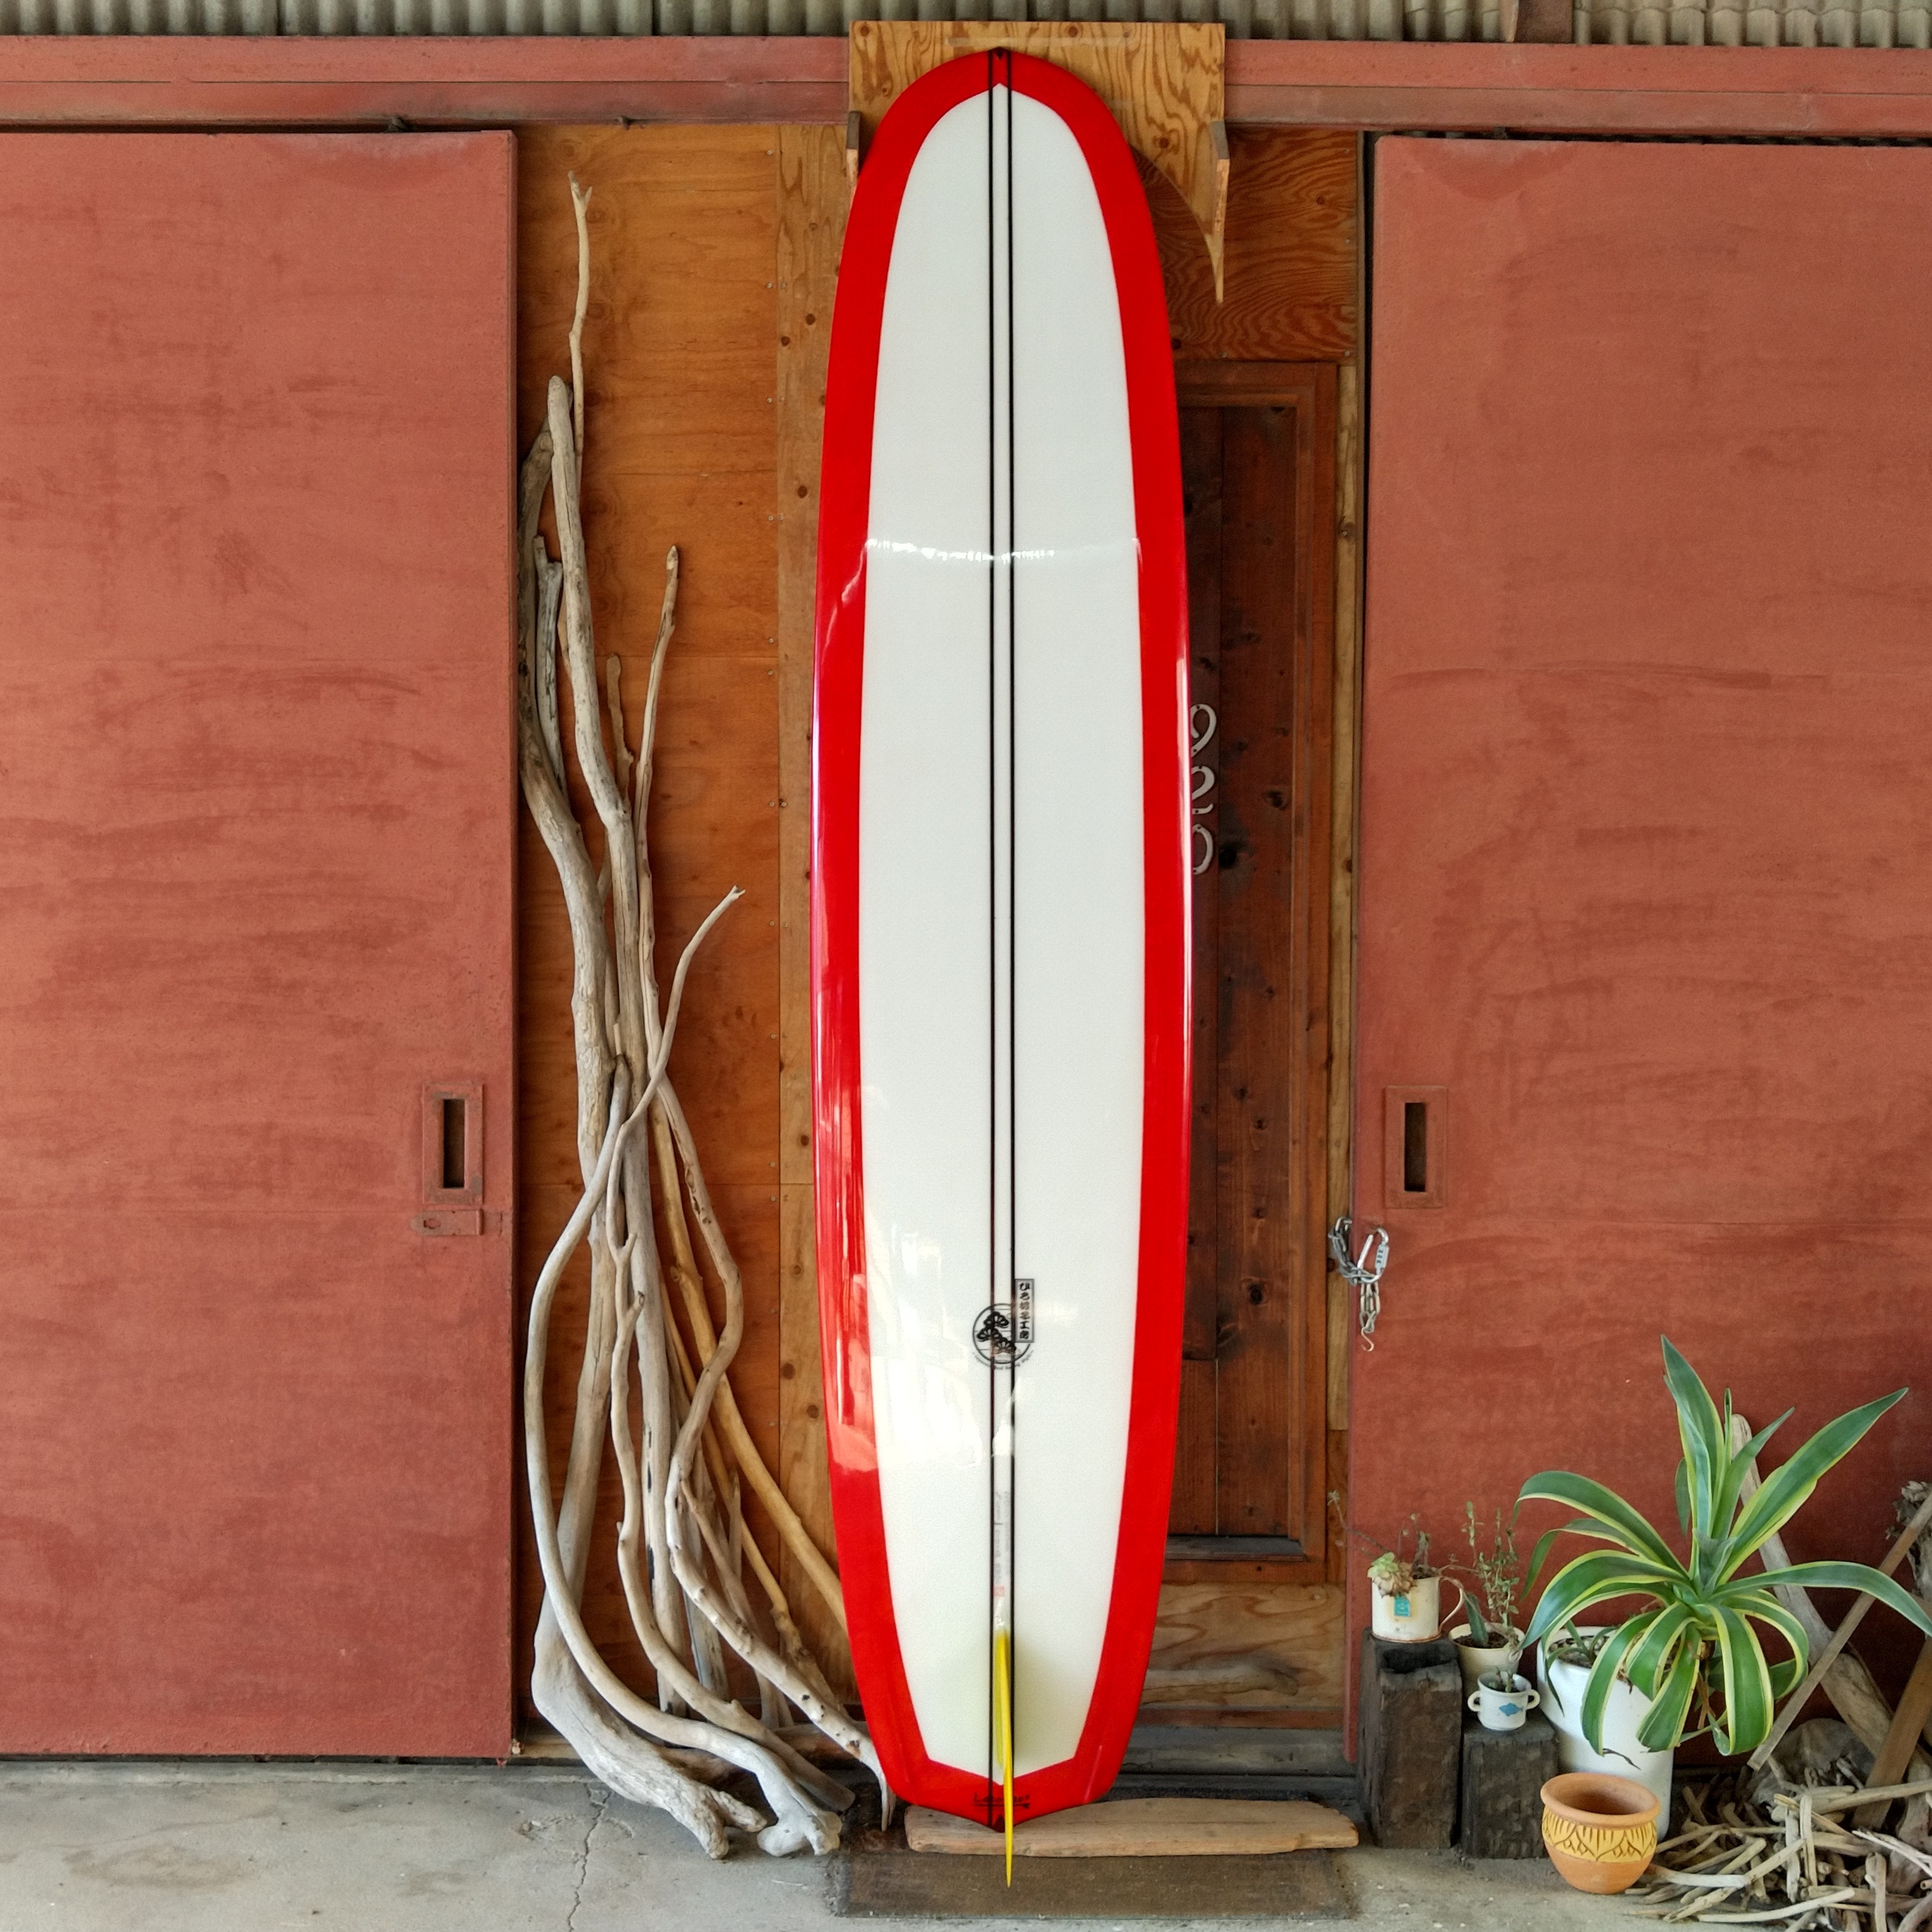 Today's Surfboards | Loco920*